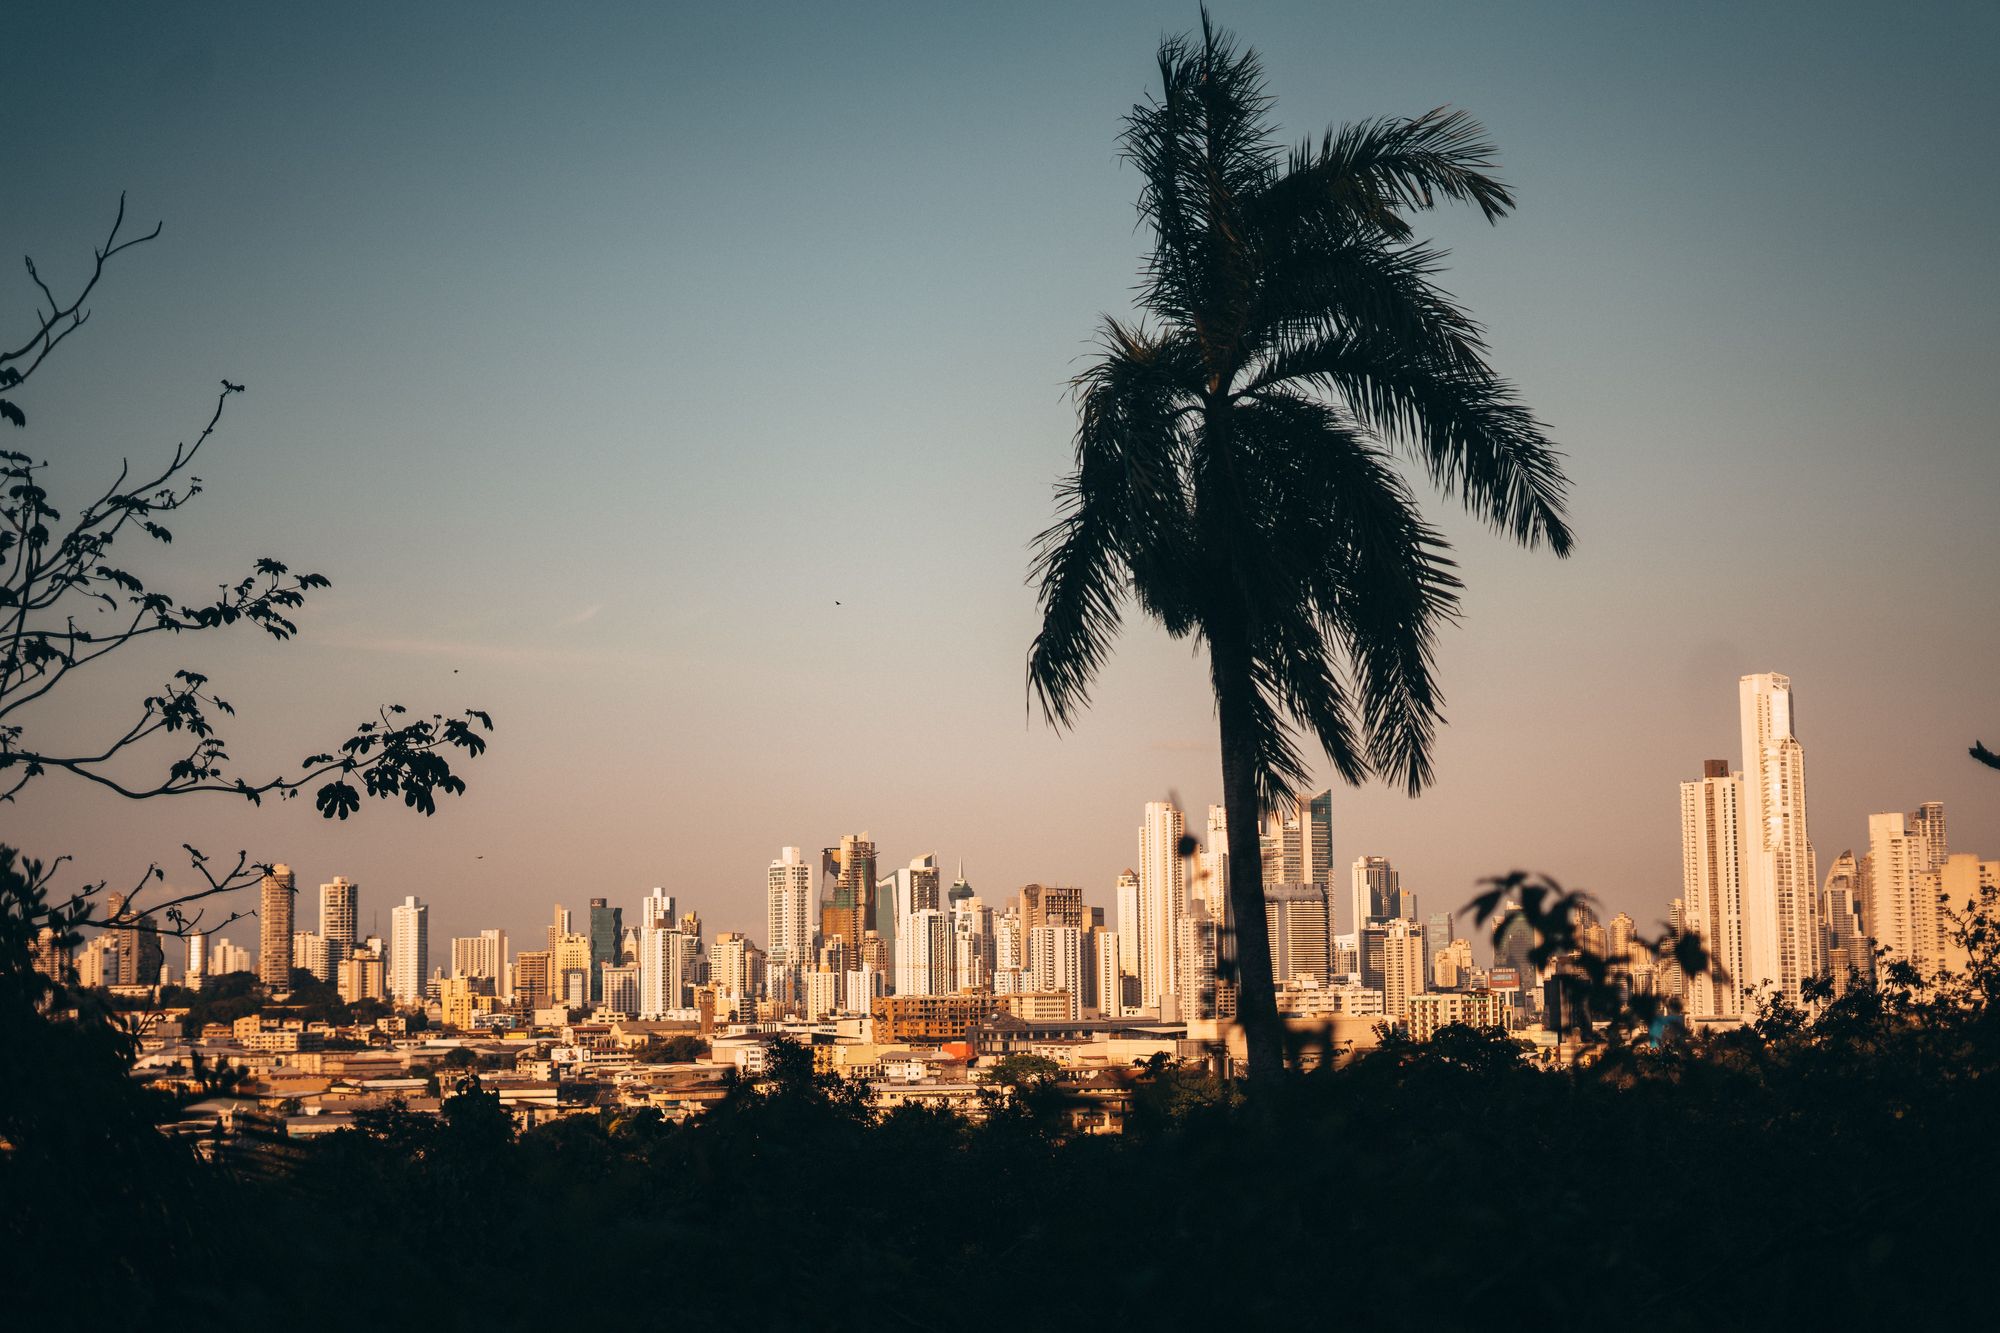 The city skyline of Panama City with a palm tree in the foreground